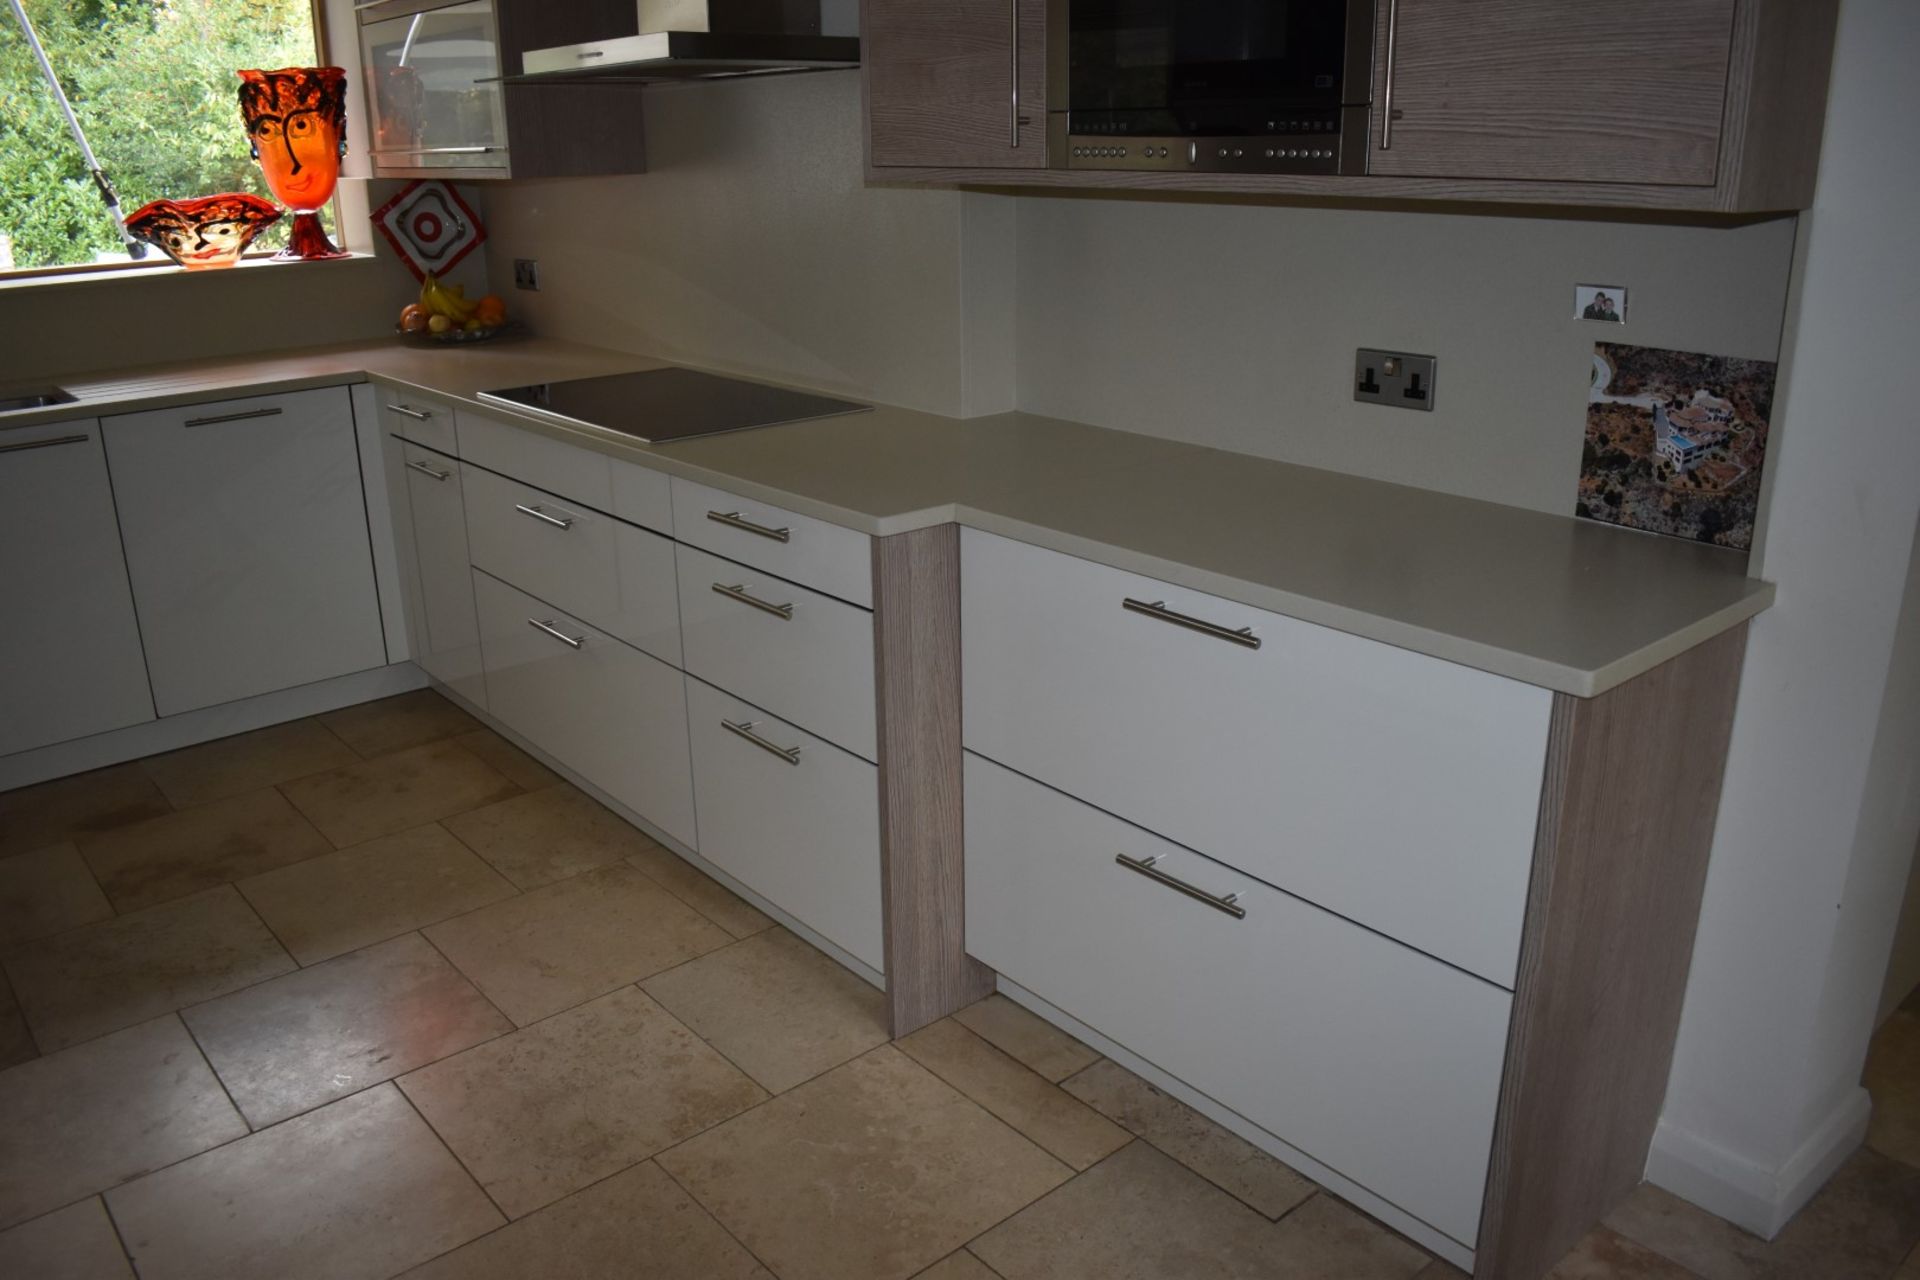 1 x Pronorm Einbauküchen German Made Fitted Kitchen With Contemporary High Gloss Cream Doors and - Image 37 of 51